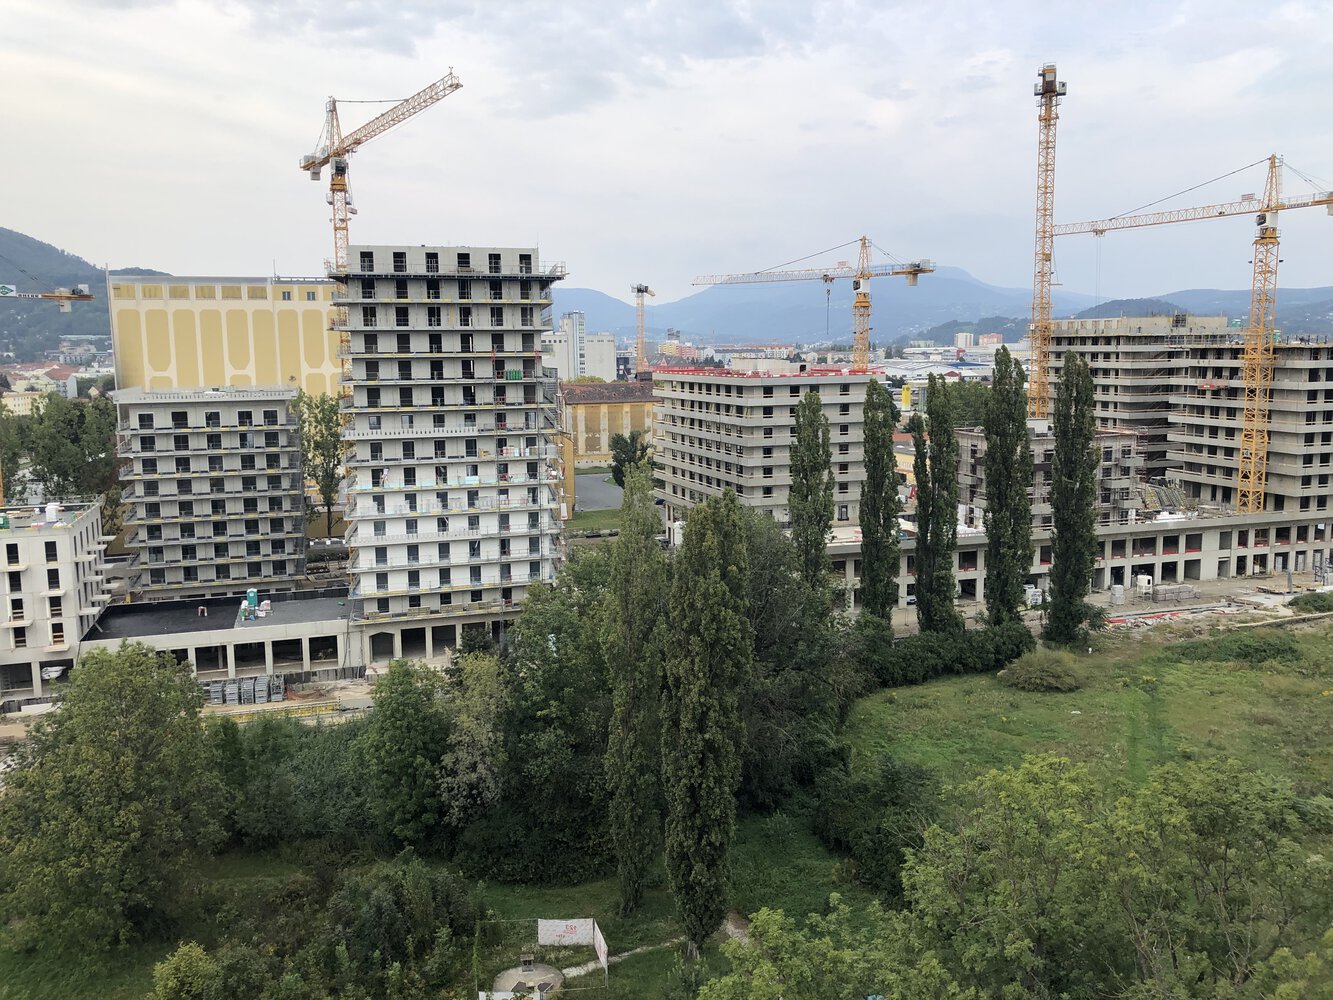 View of the Graz Reininghaus project